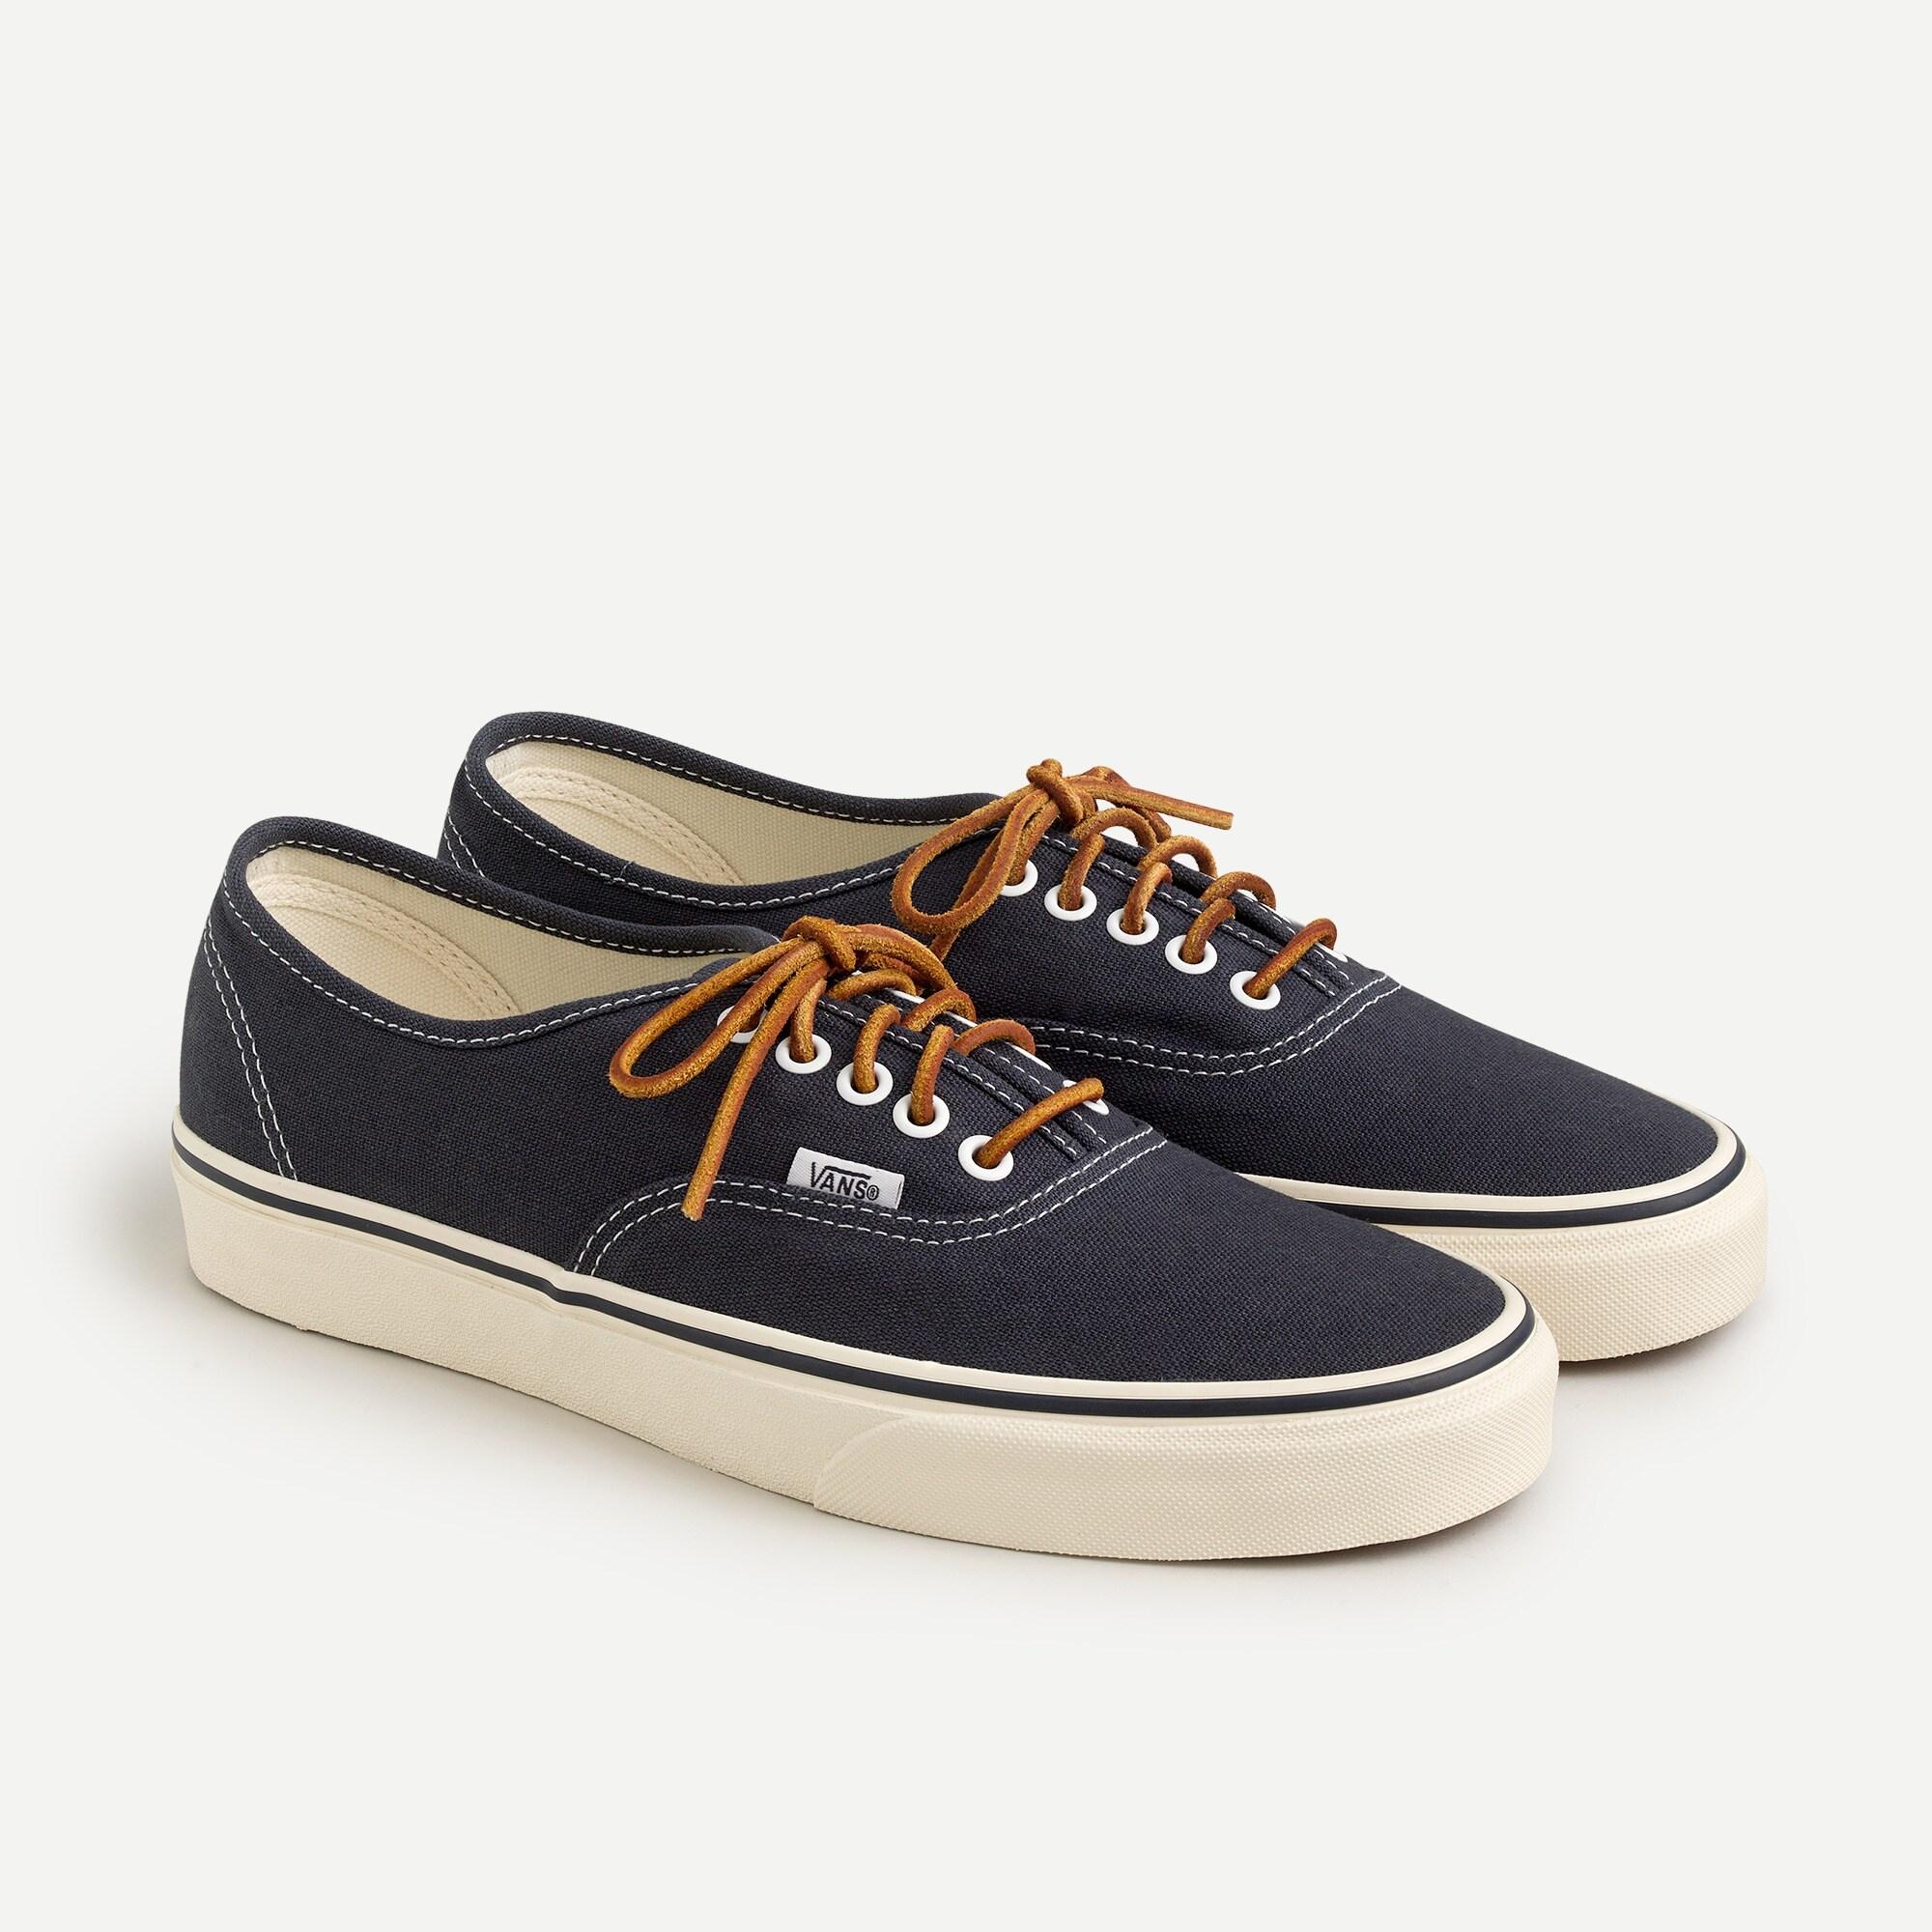 Buy Vans Unisex Authentic Lite Lace-Up Sneakers Blue (Speckle Dress  Blues/White) 3.5 UK at Amazon.in